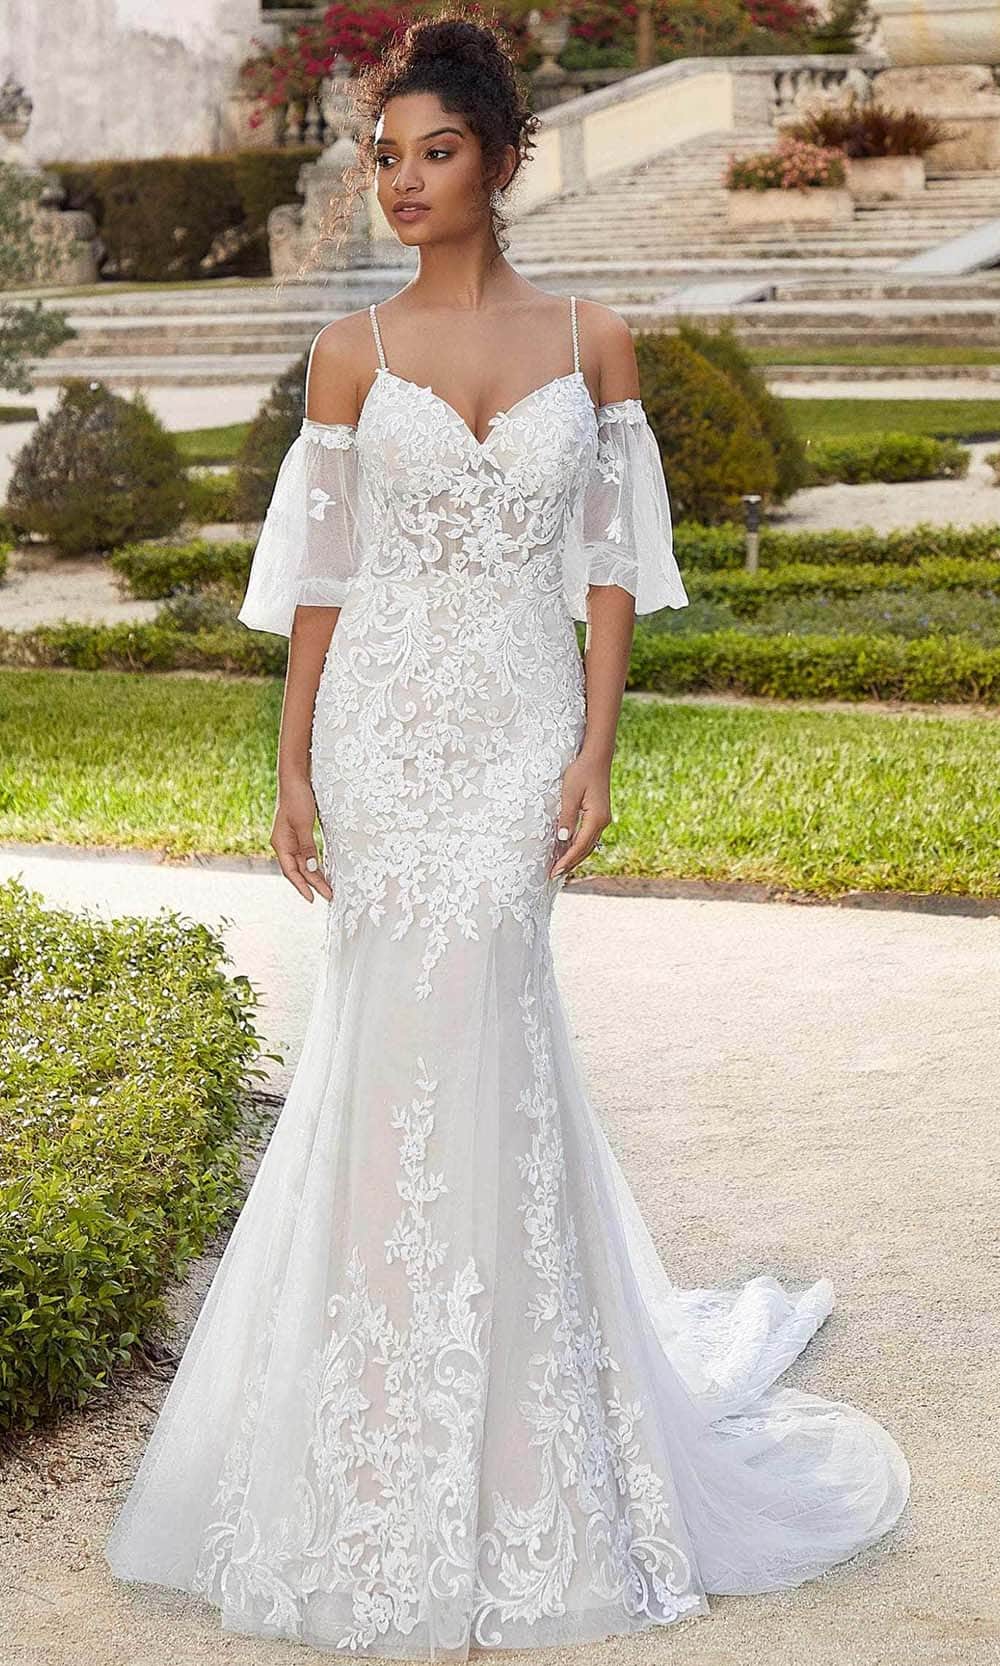 Mori Lee Bridal 2469 - Embroidered Sweetheart Trumpet Bridal Gown
